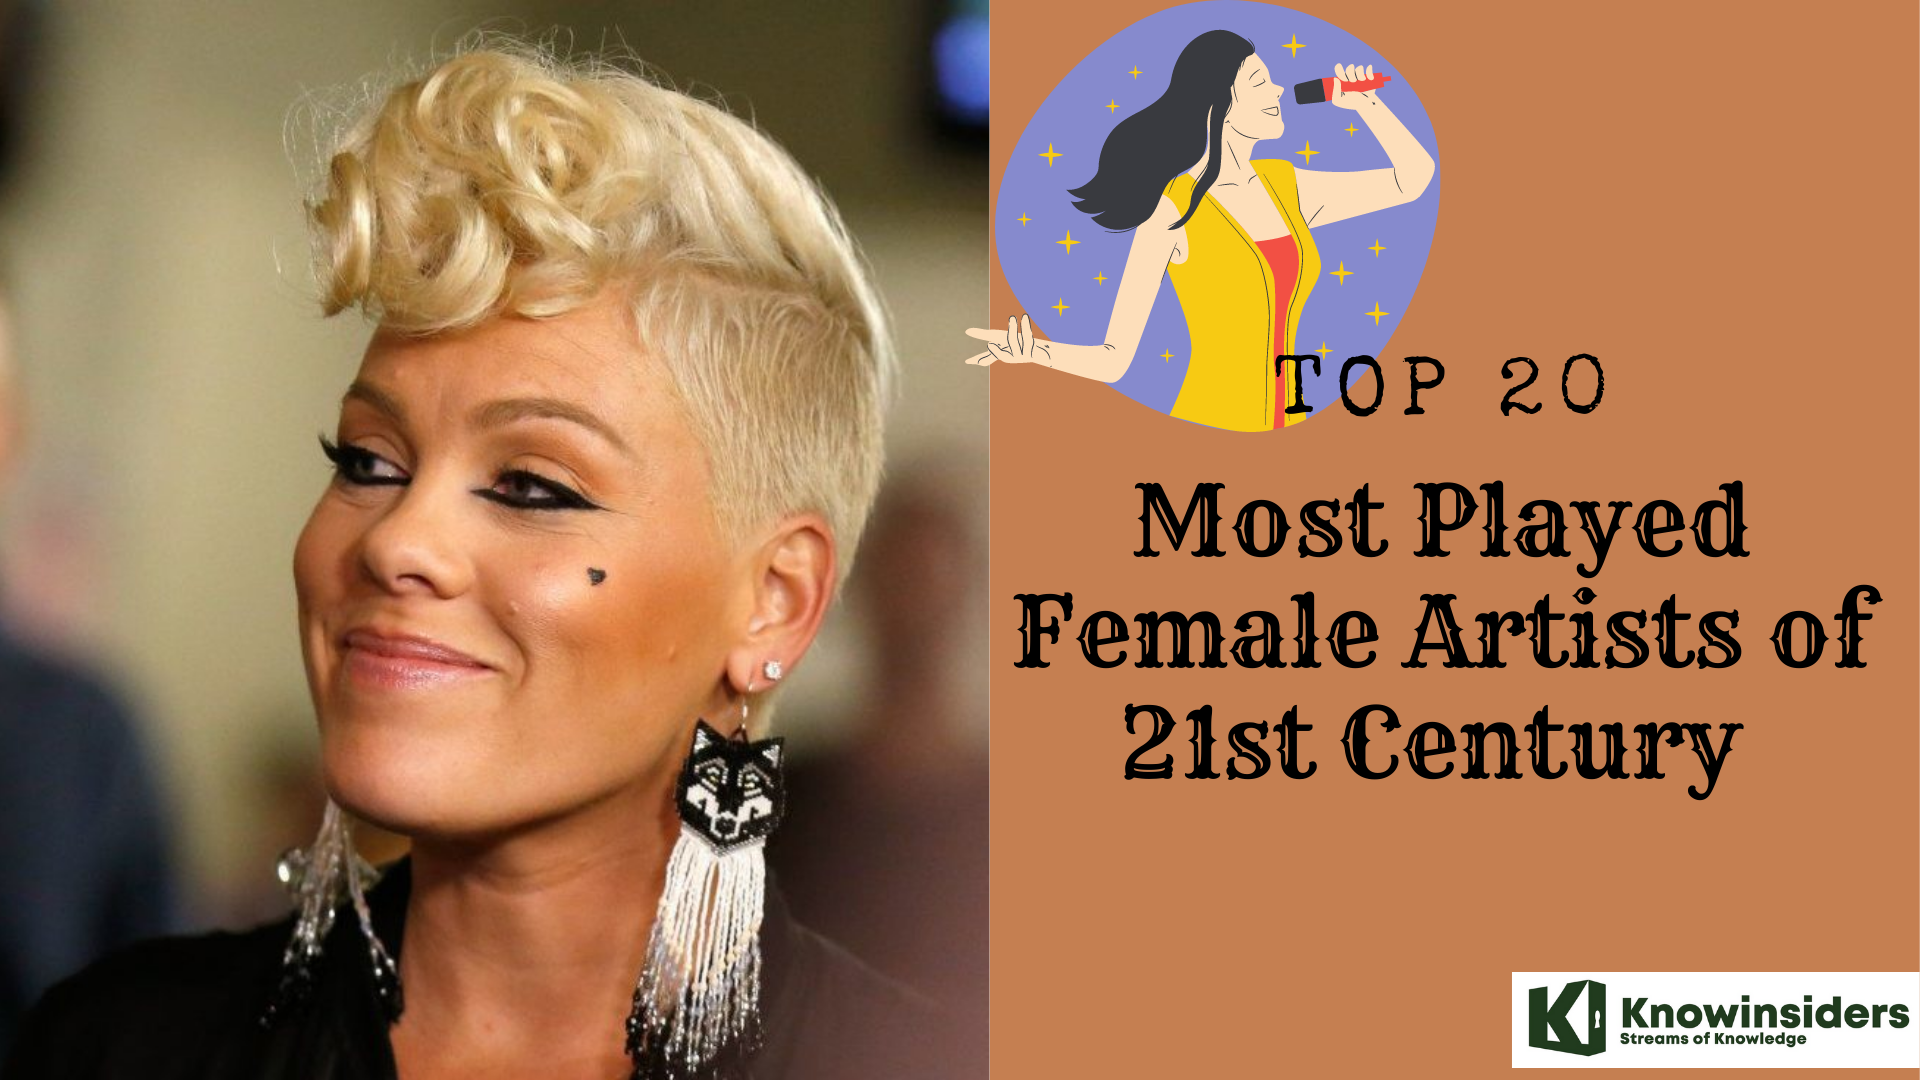 Top 20 most played female artists of 21st century 